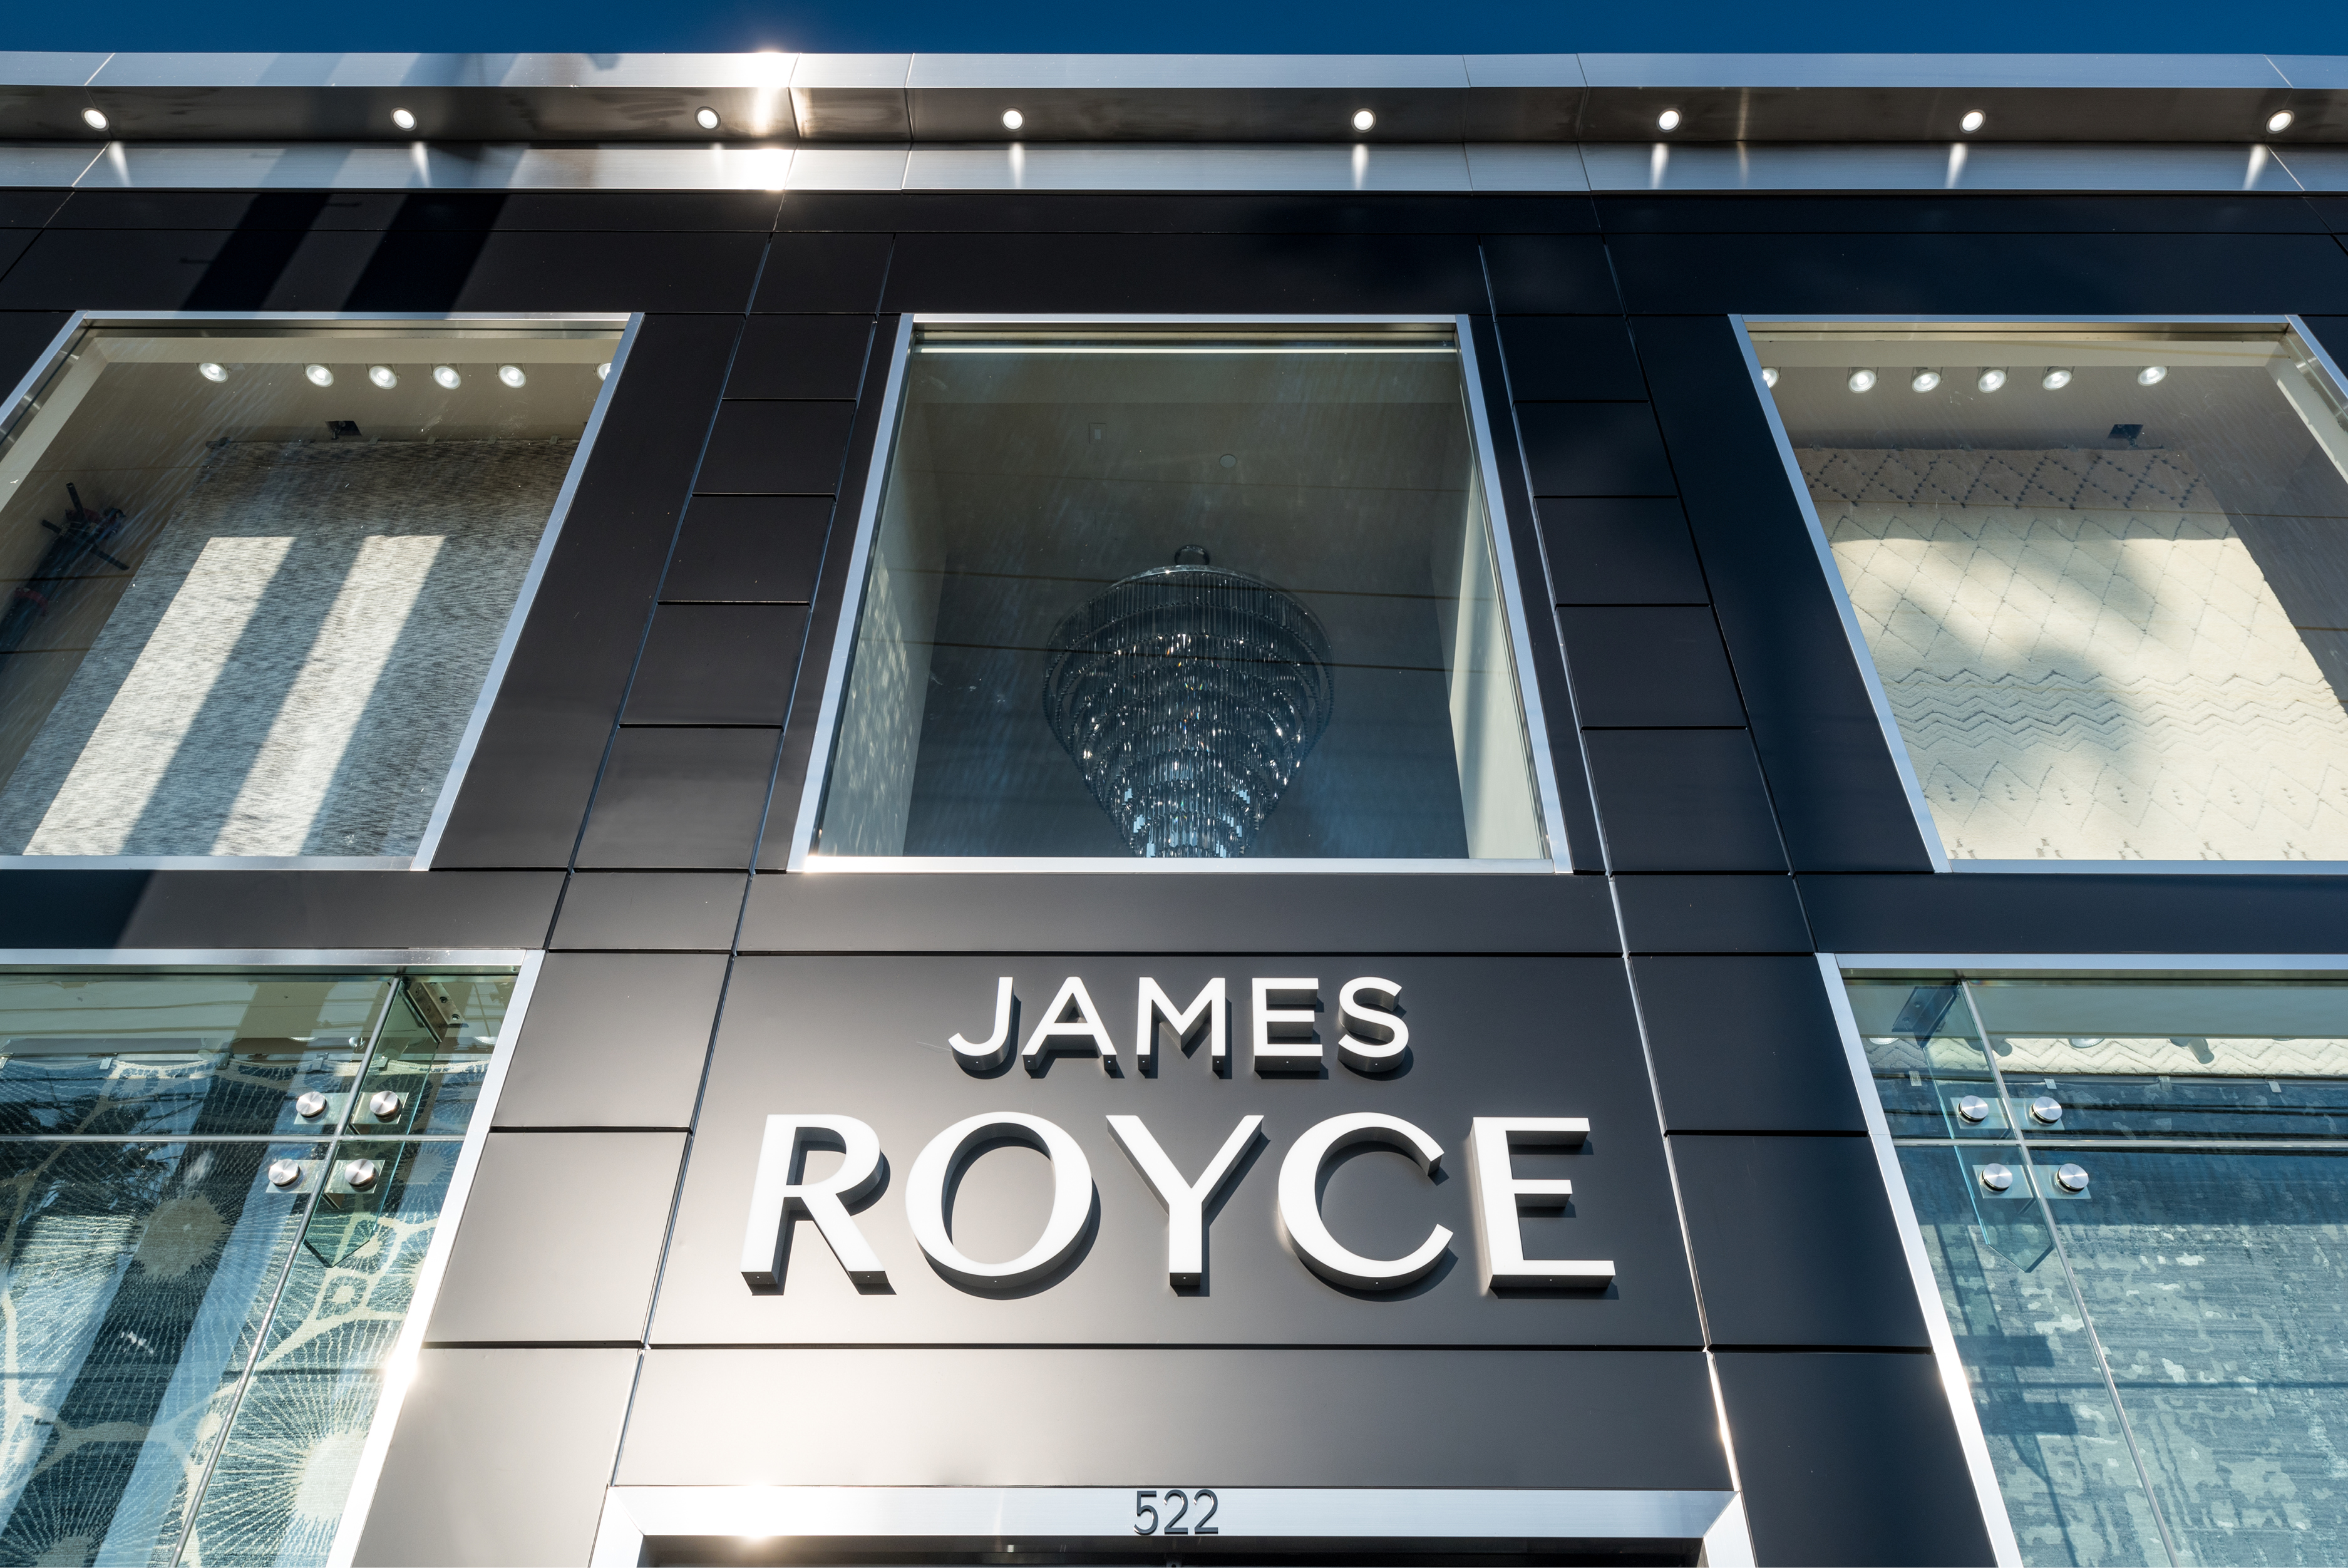 A new storefront for James Royce Rug Gallery shines bright in ALPOLIC MCM TOB Black and Stainless Steel